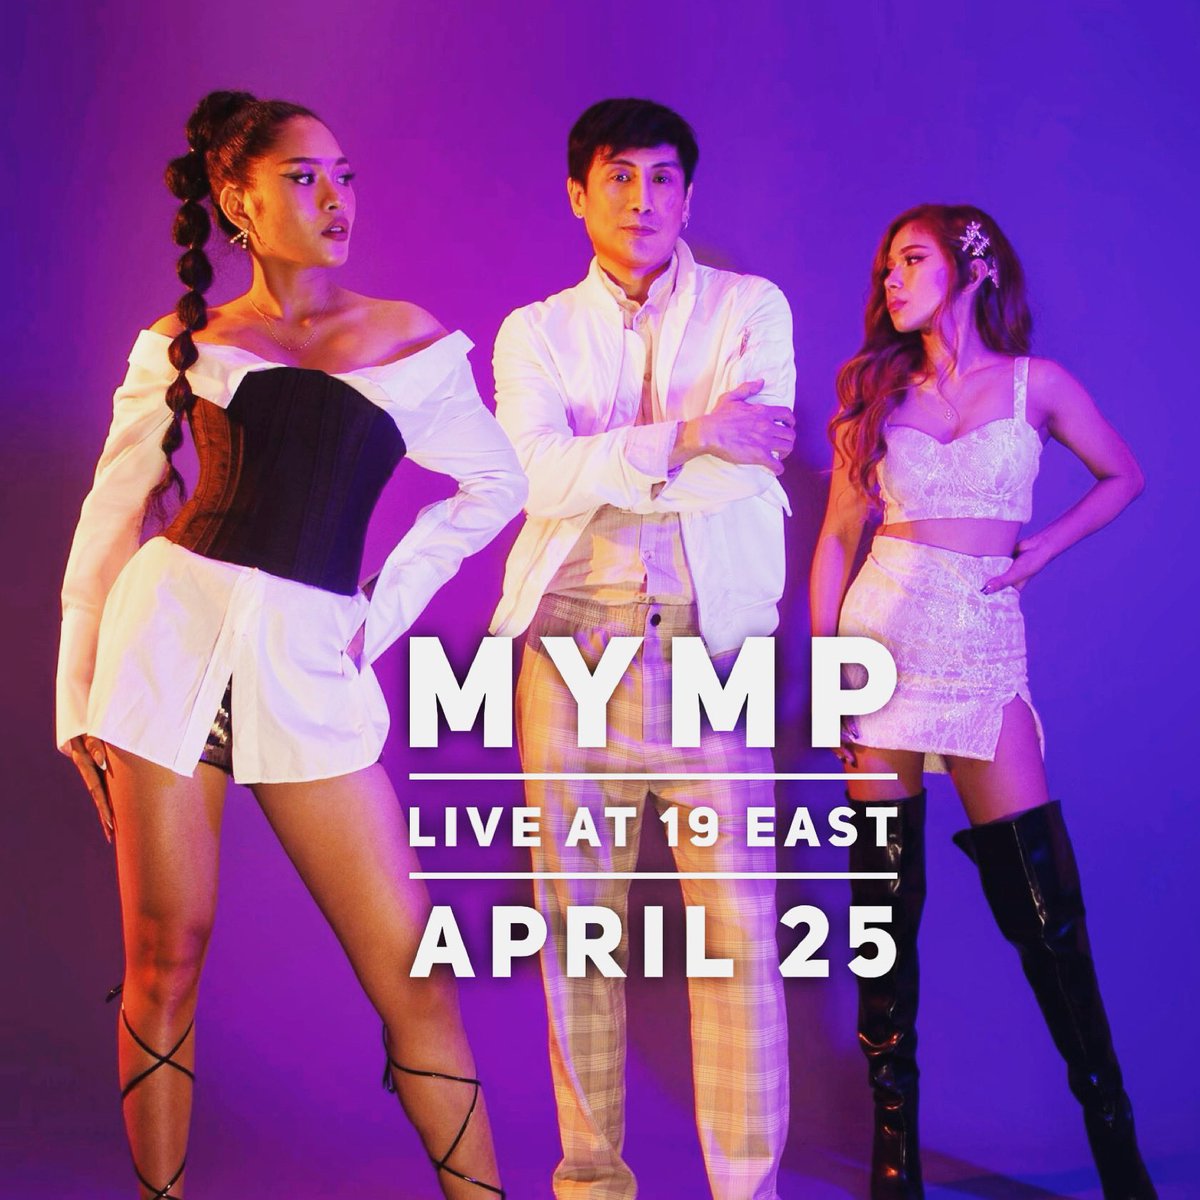 MYMP & Medward will perform at 19 East tonight, April 25. Admission fee is P700. No minimum consumable charge. Doors open at 7pm. Show starts around 8pm. Seating is first-come, first-served. Reservation is not allowed. No age limit. Enjoy!